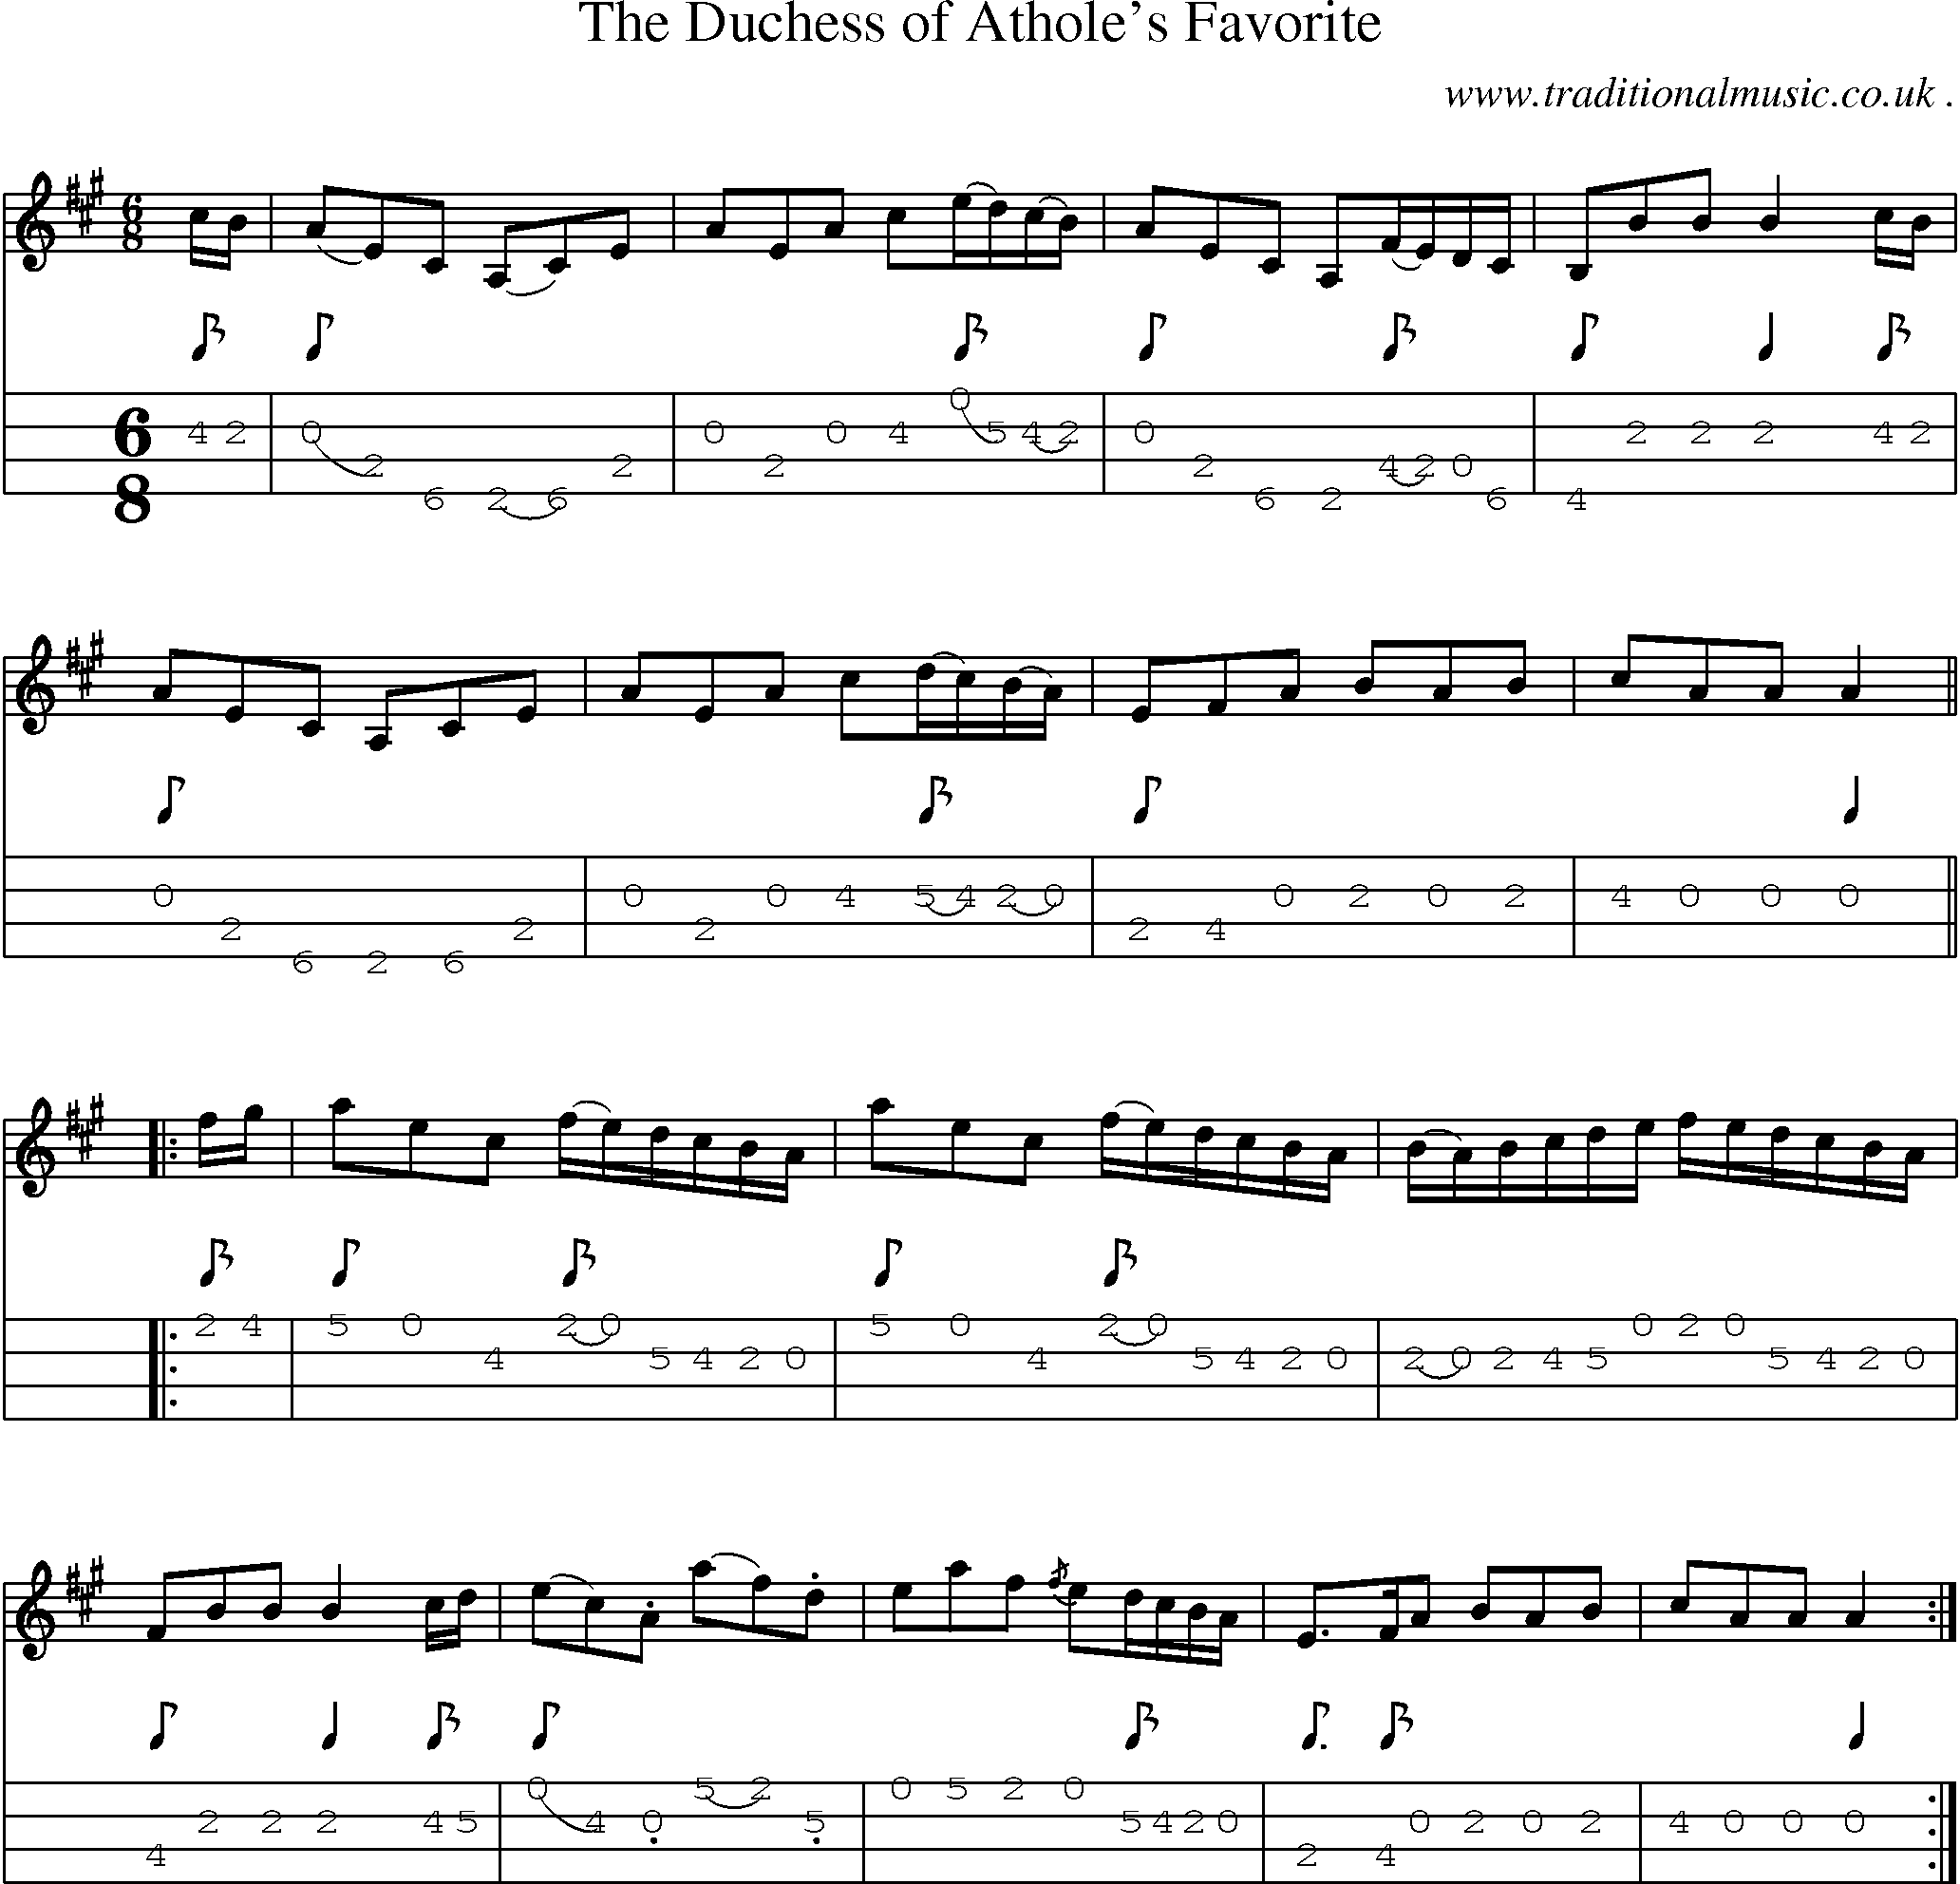 Sheet-music  score, Chords and Mandolin Tabs for The Duchess Of Atholes Favorite